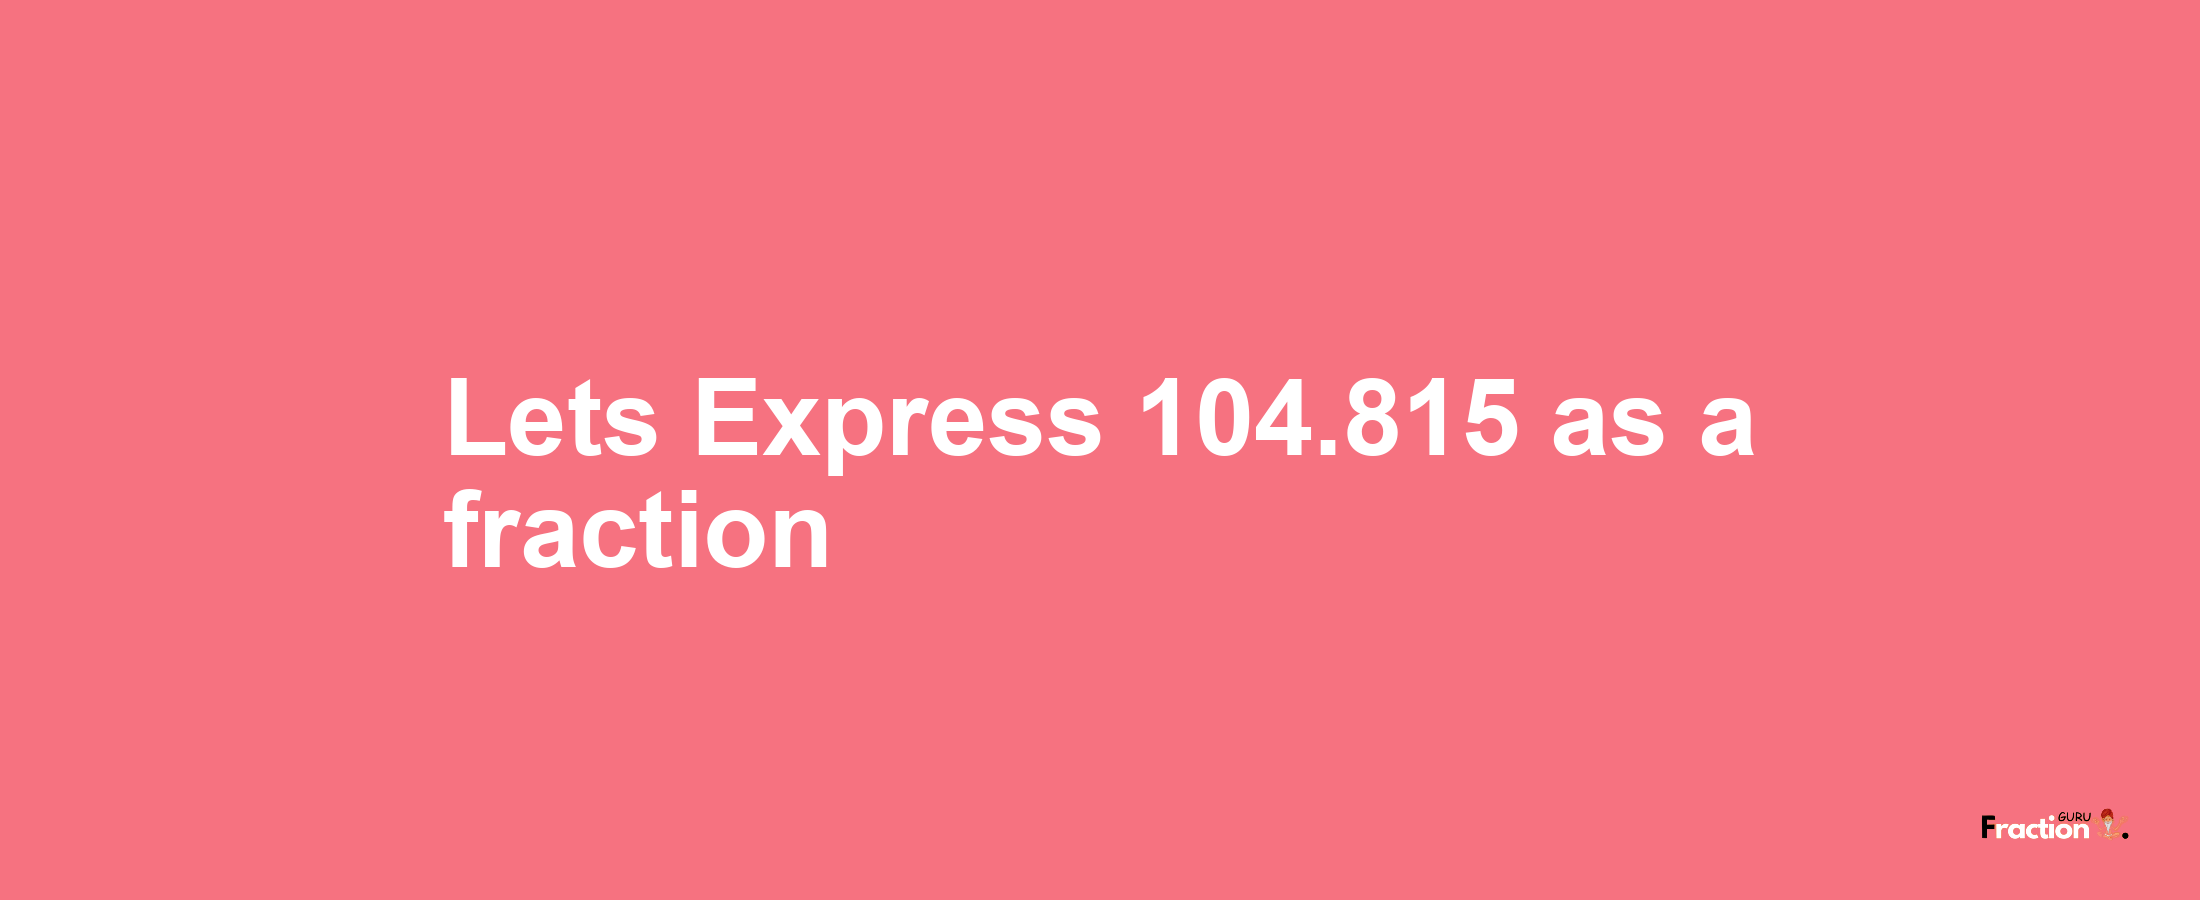 Lets Express 104.815 as afraction